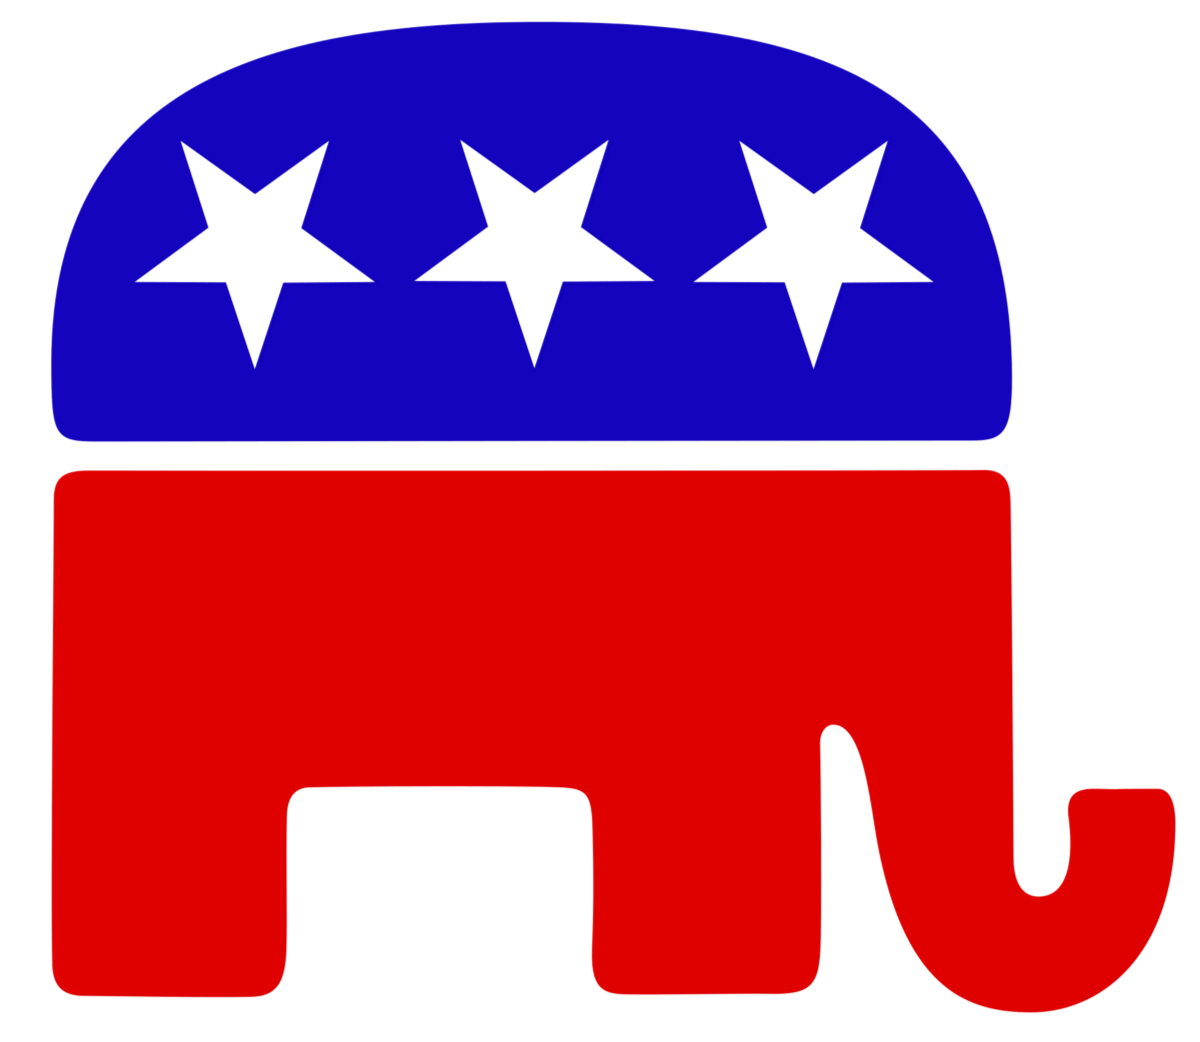 In defense of the. Democracy clipart conservatism